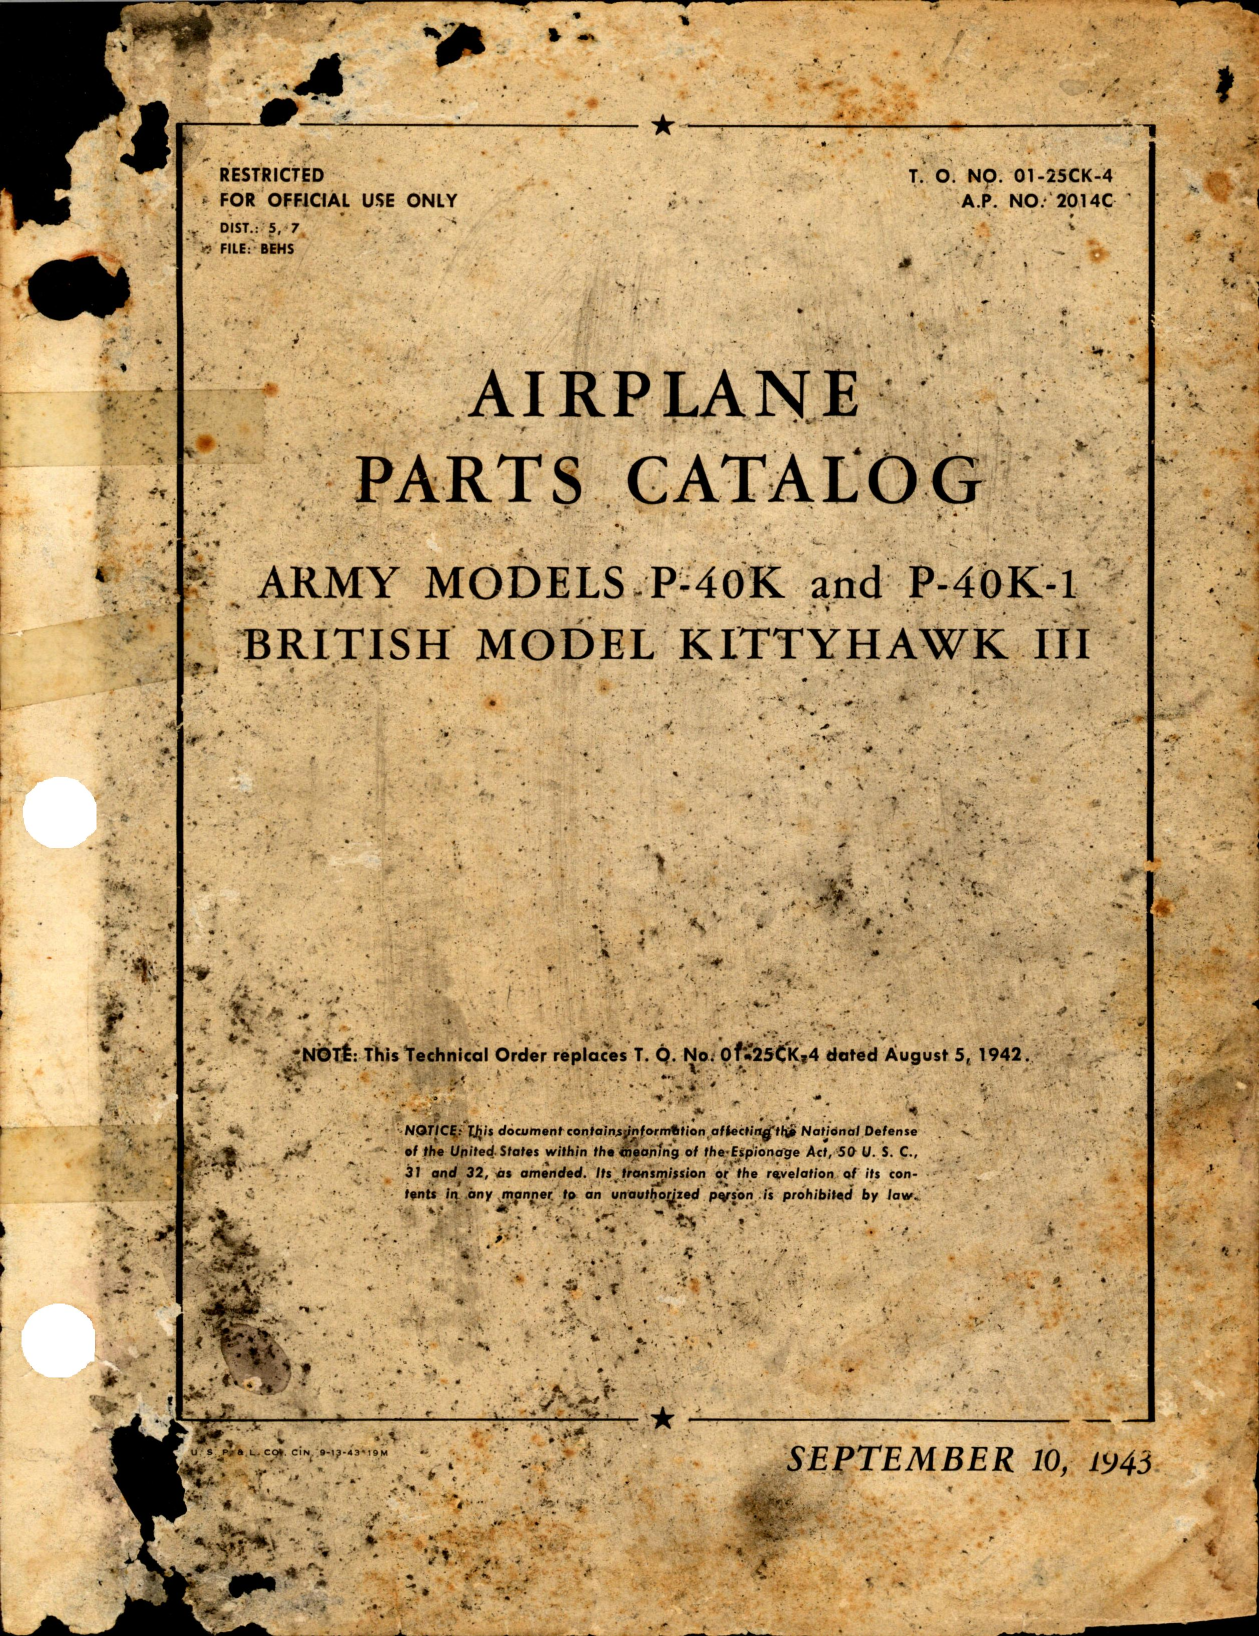 Sample page 1 from AirCorps Library document: Airplane Parts Catalog for Army Models P-40K and P-40K-1